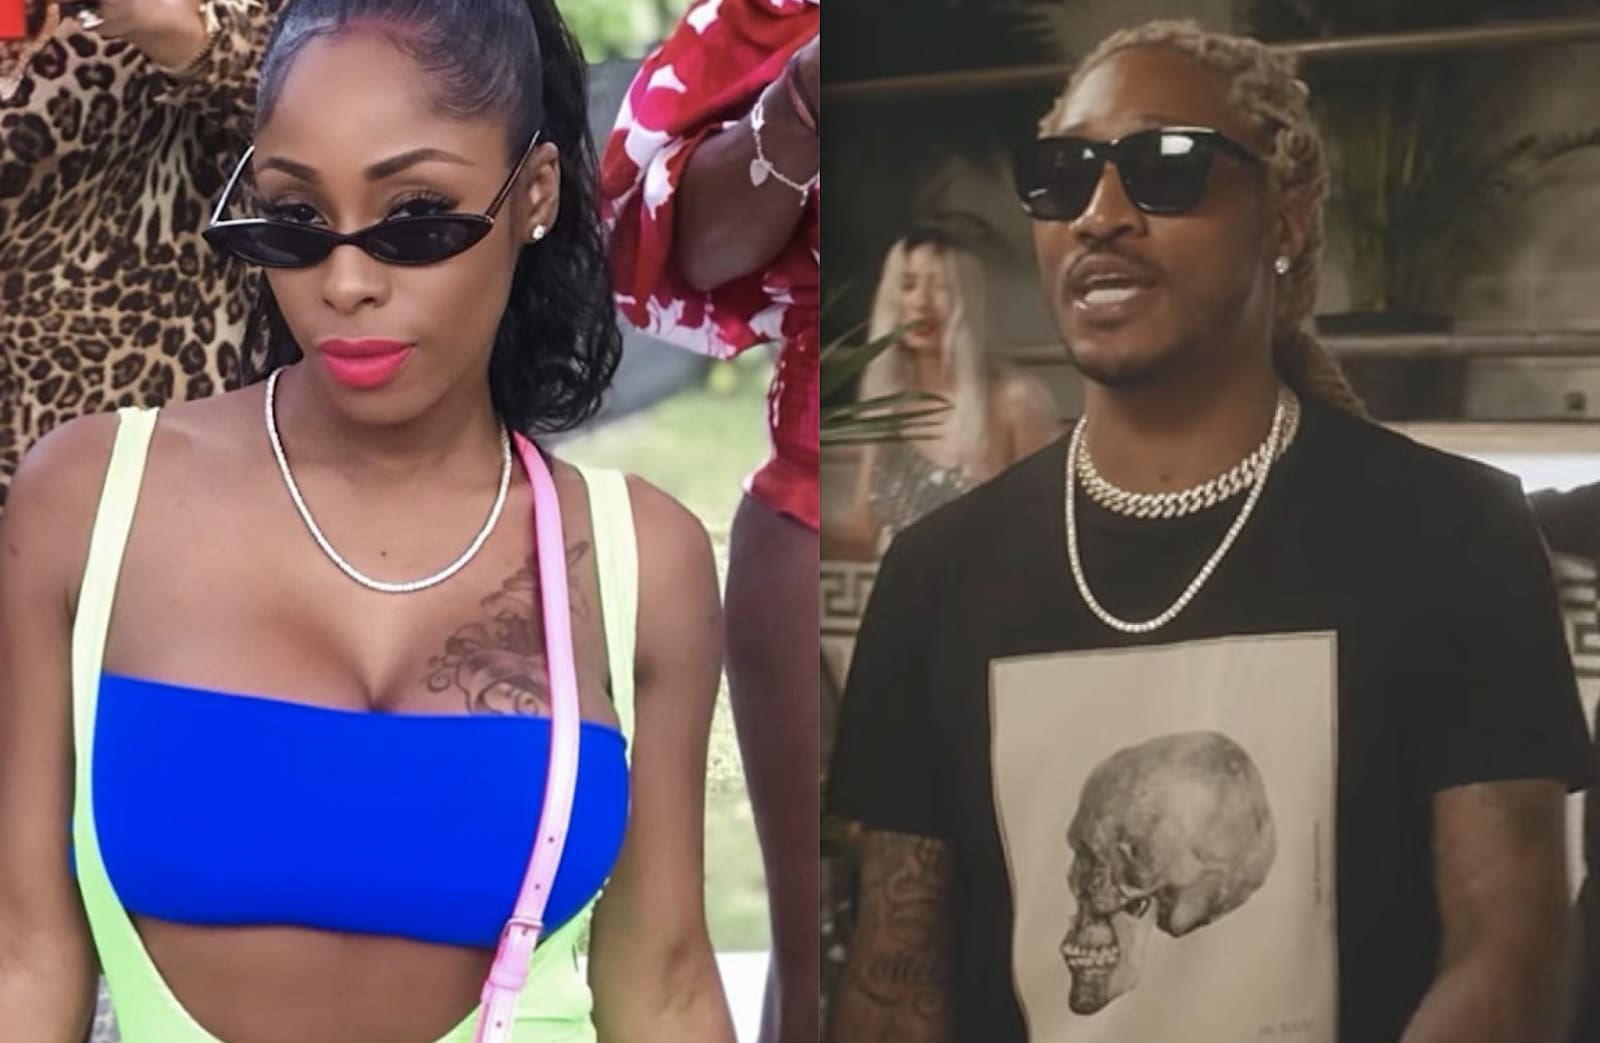 Future Sues His Alleged Baby Mama, Eliza Reign - Here Are All The Details